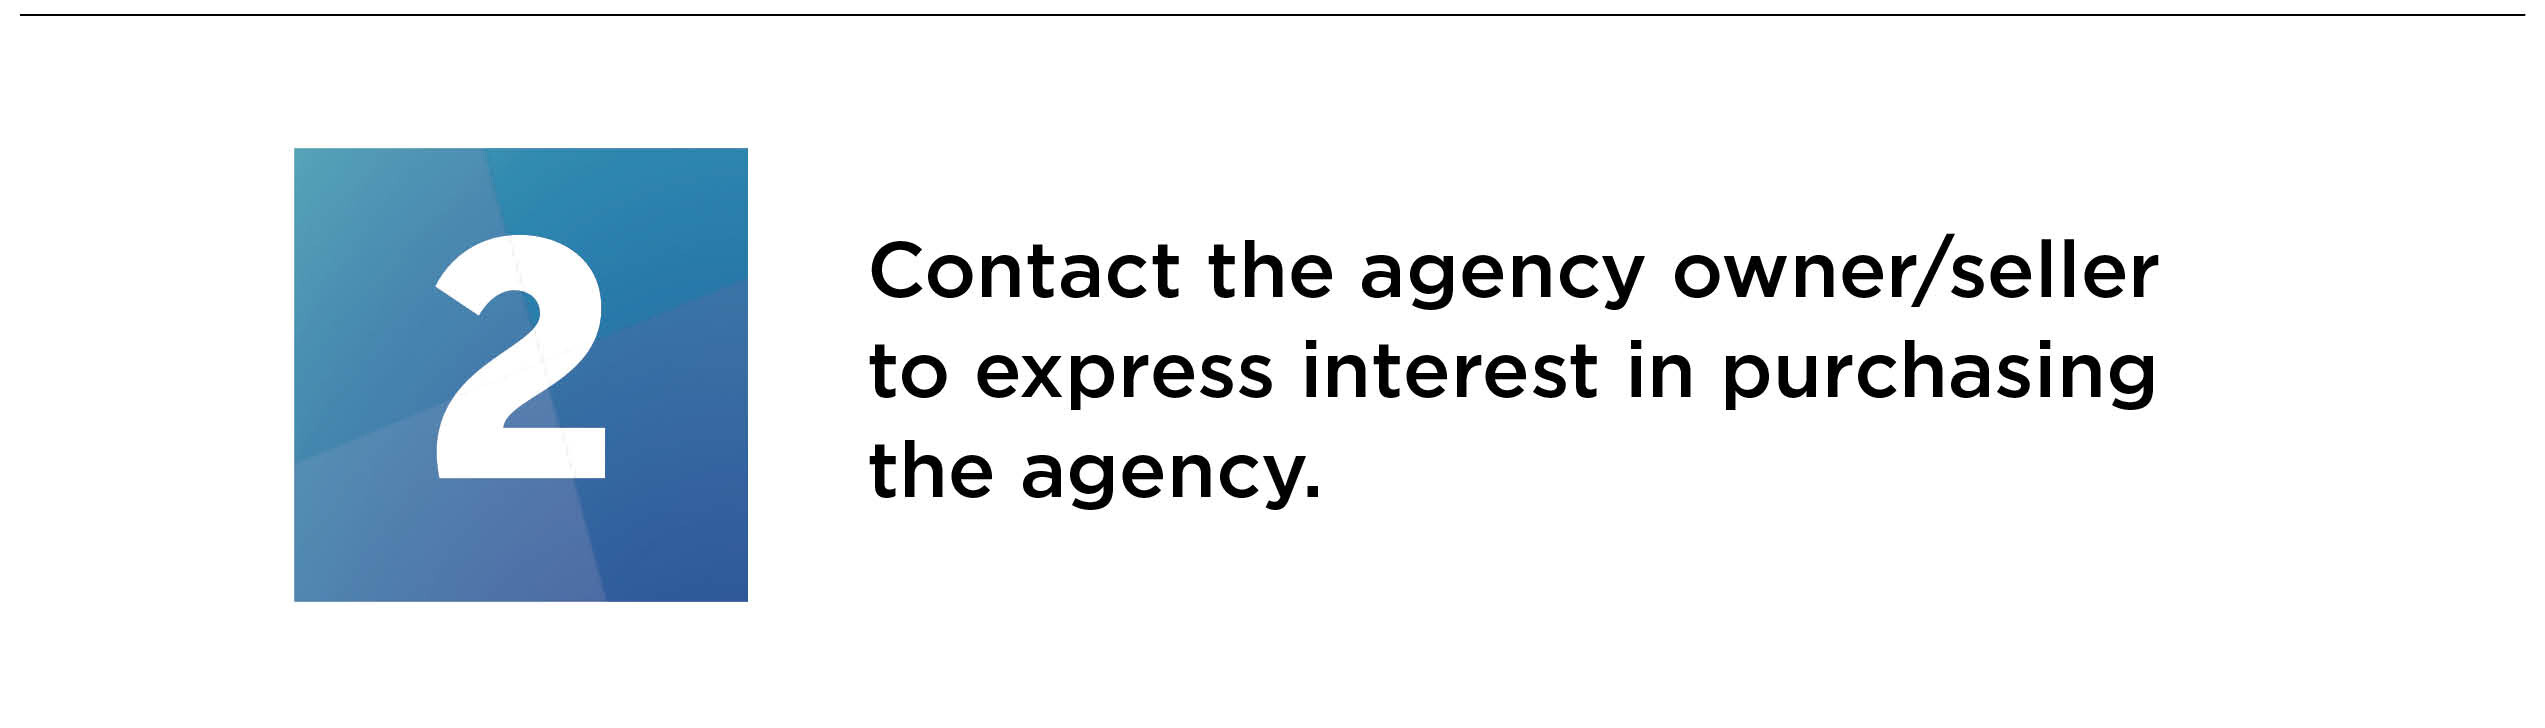 contact the agency owner / seller to express interest in purchasing the agency